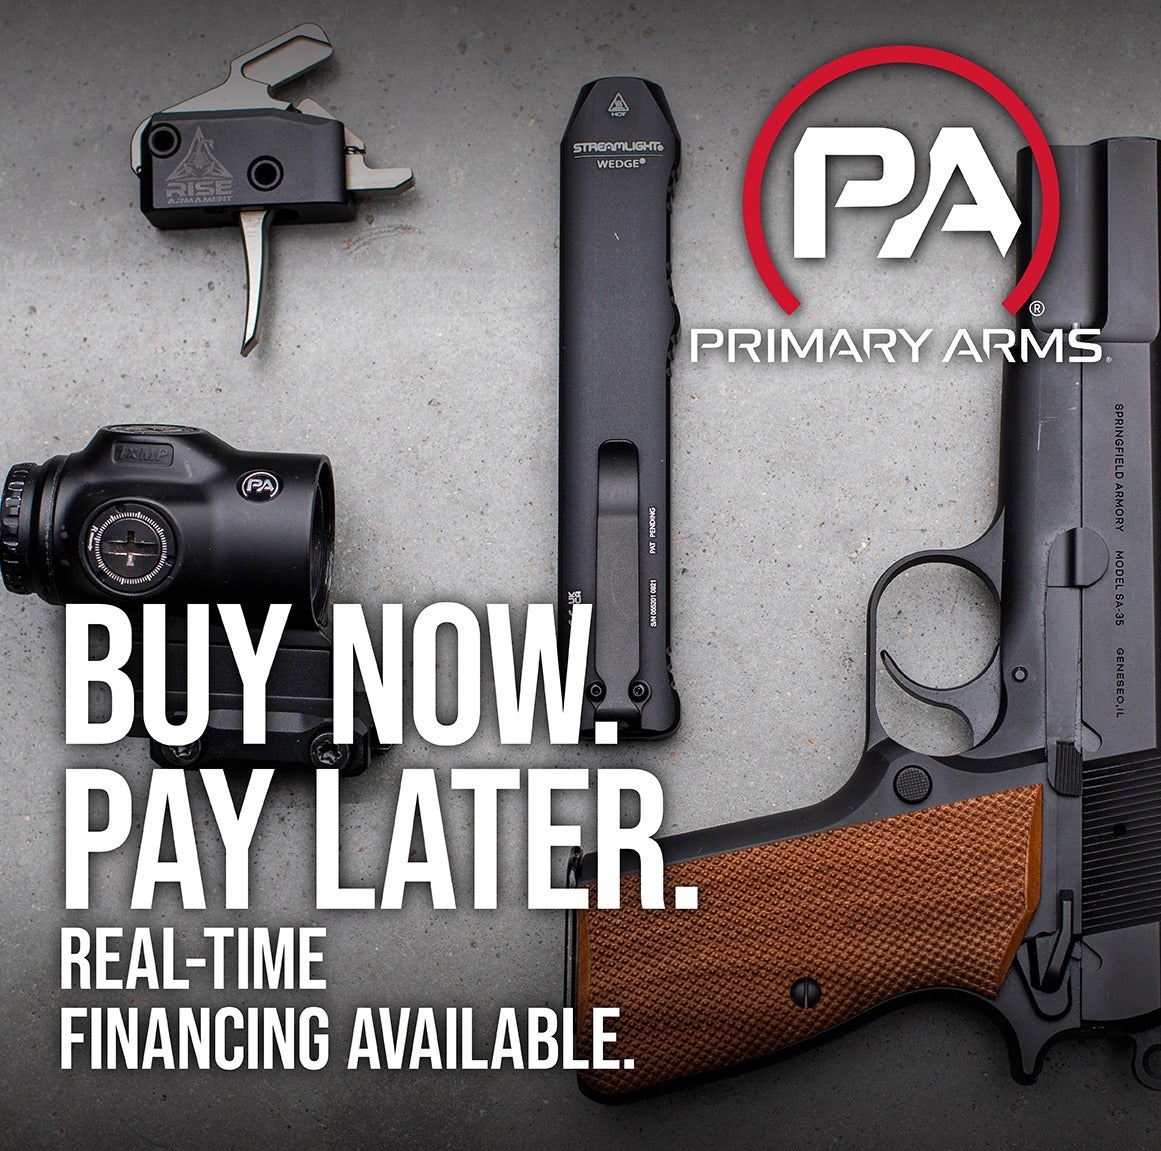 Primary Arms and Credova Financing offer "Buy Now, Pay Later" Program